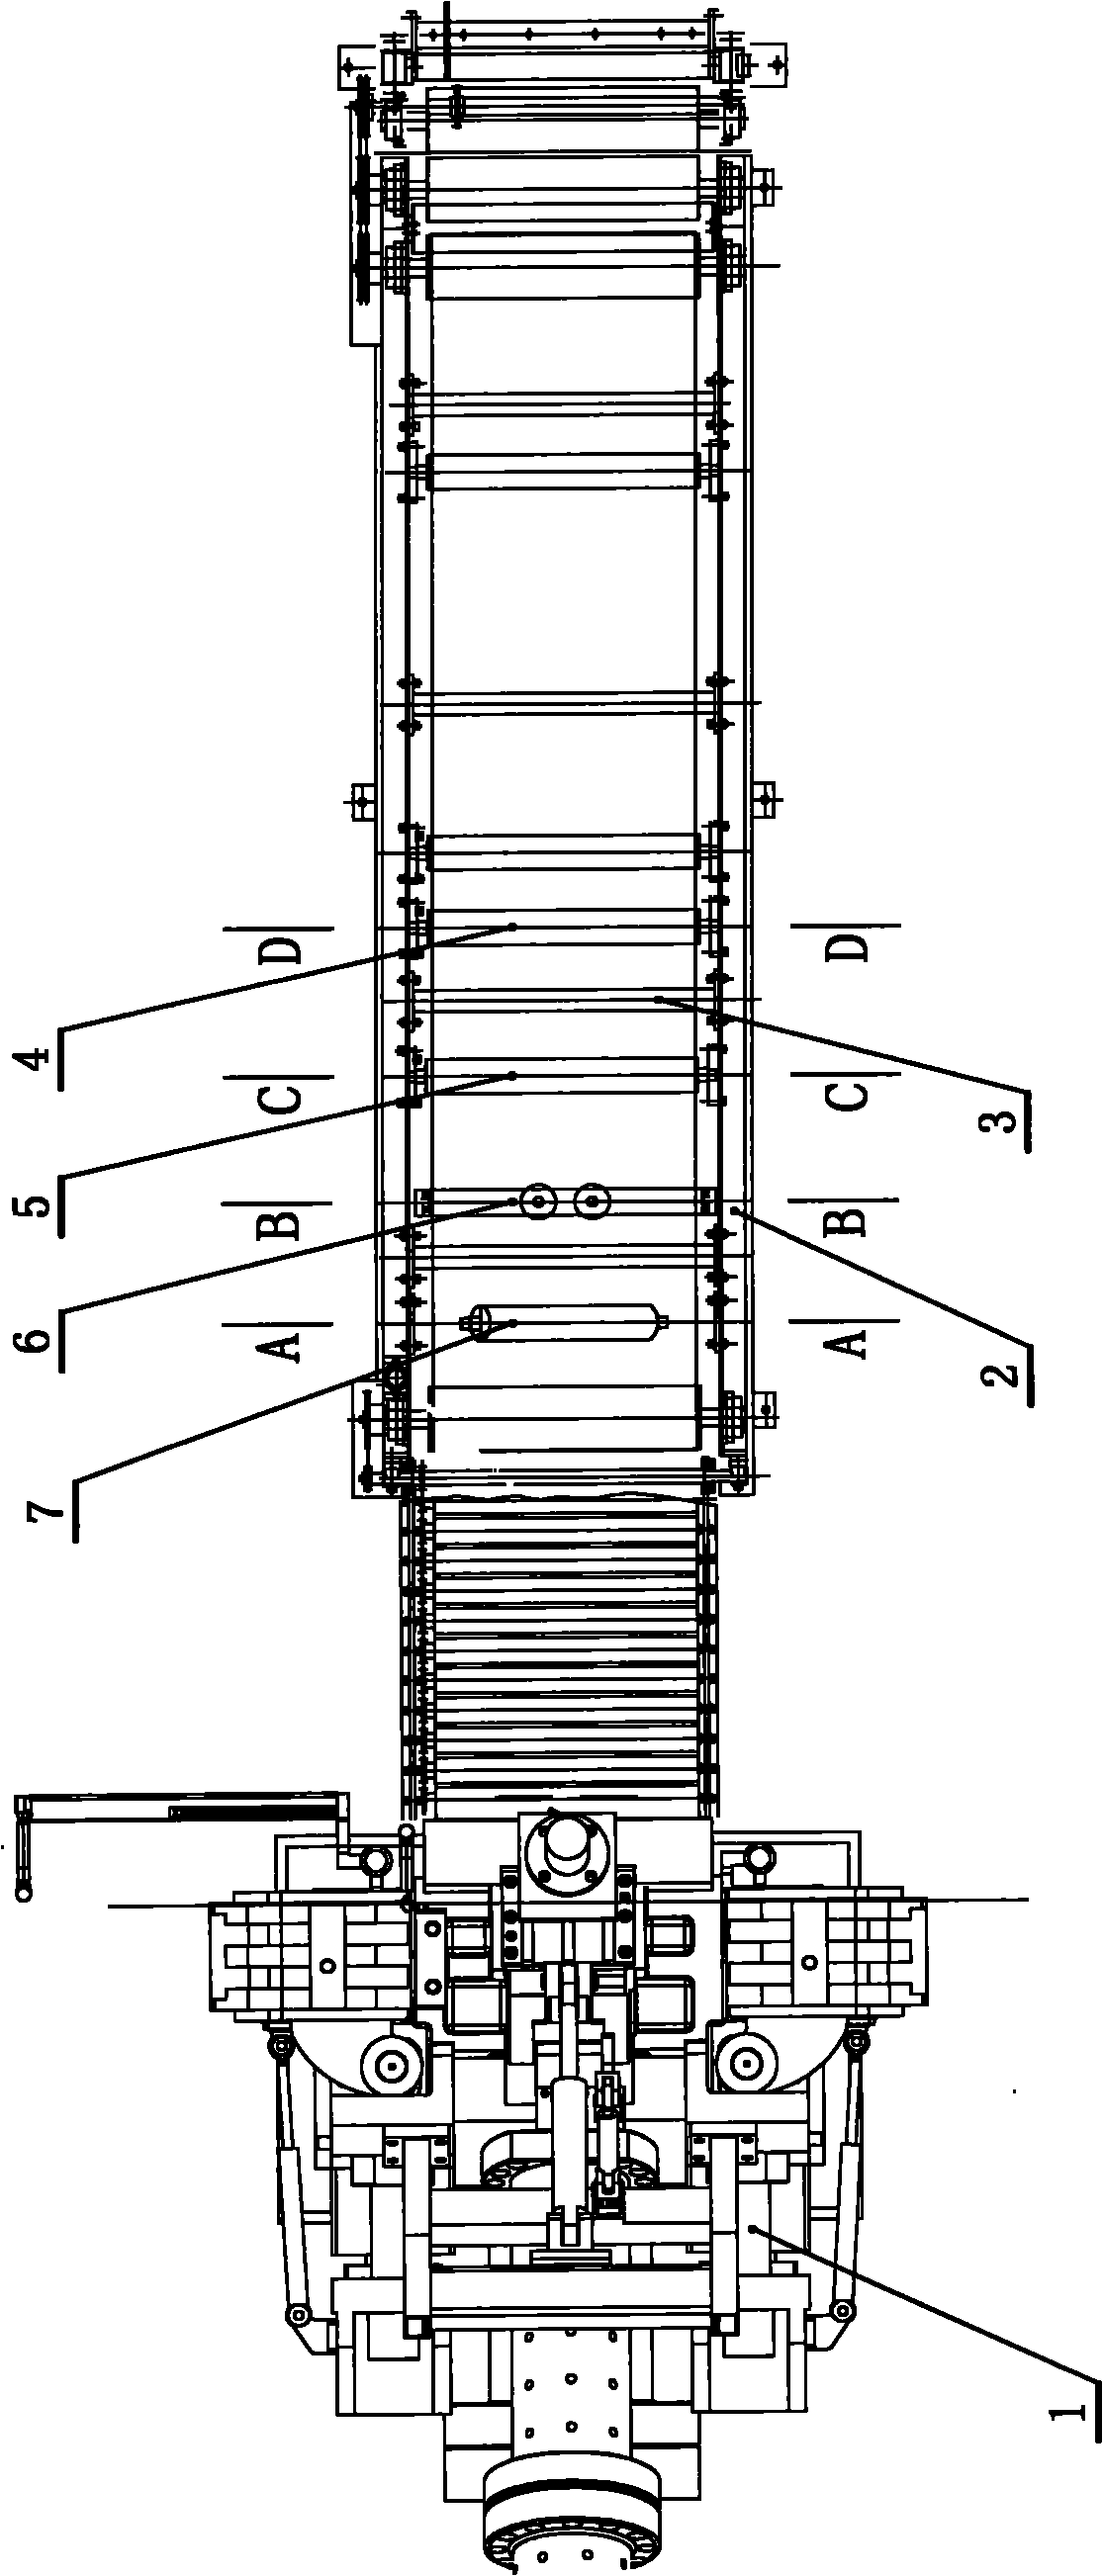 Double-plex extrusion linkage production line with turnover device